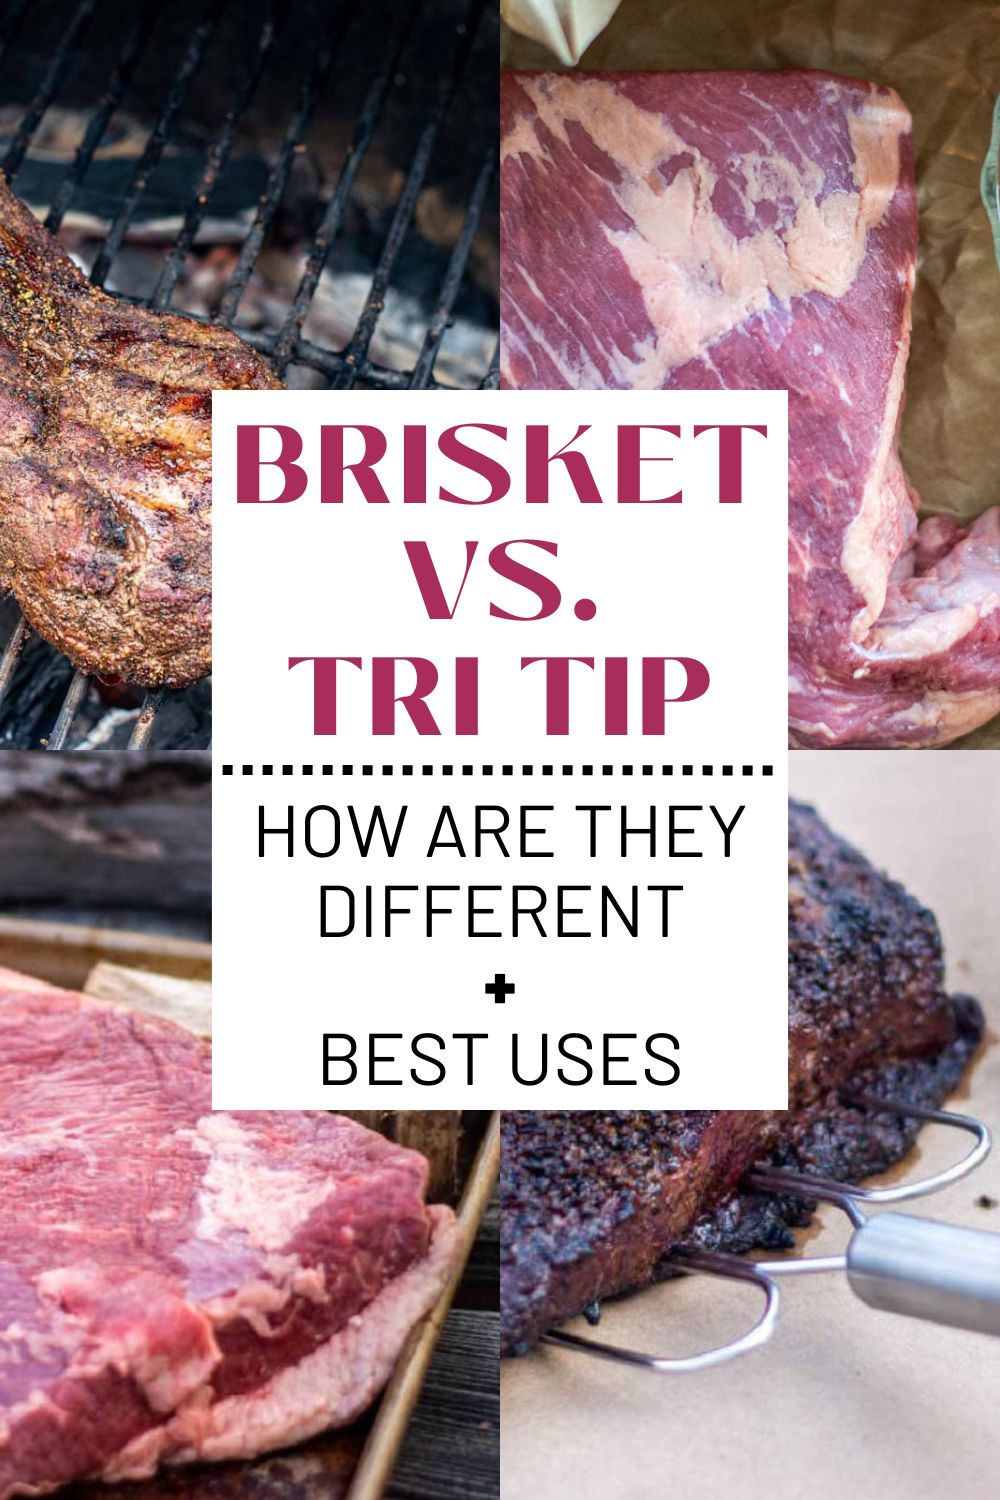 Brisket vs. Tri Tip: How Are They Different?